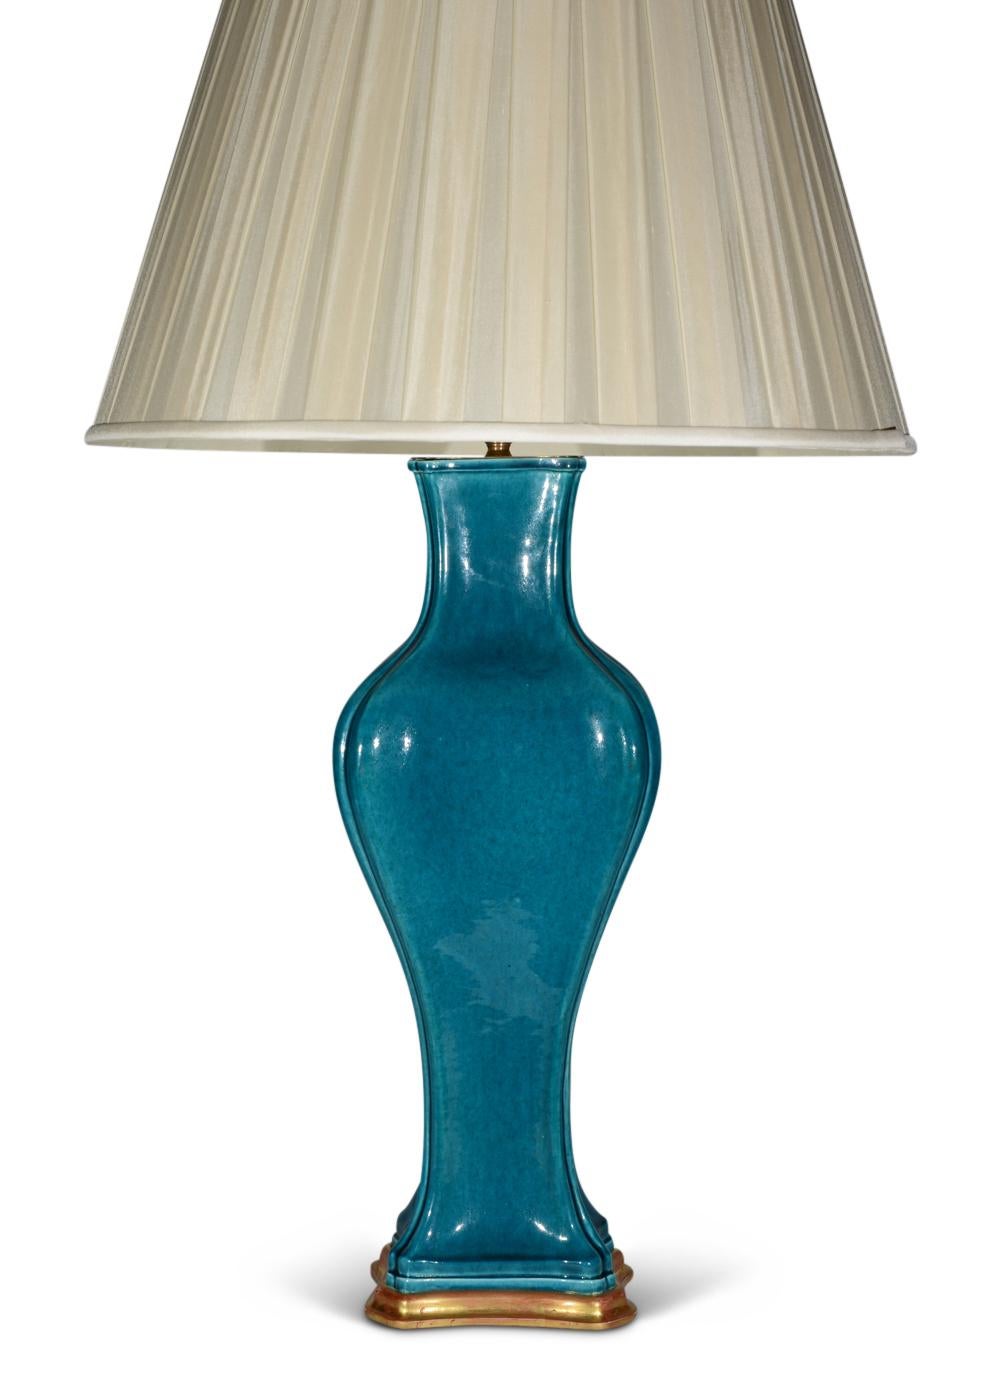 19th Century Elegant Chinese Deep Turquoise Glazed Porcelain Table Lamp For Sale